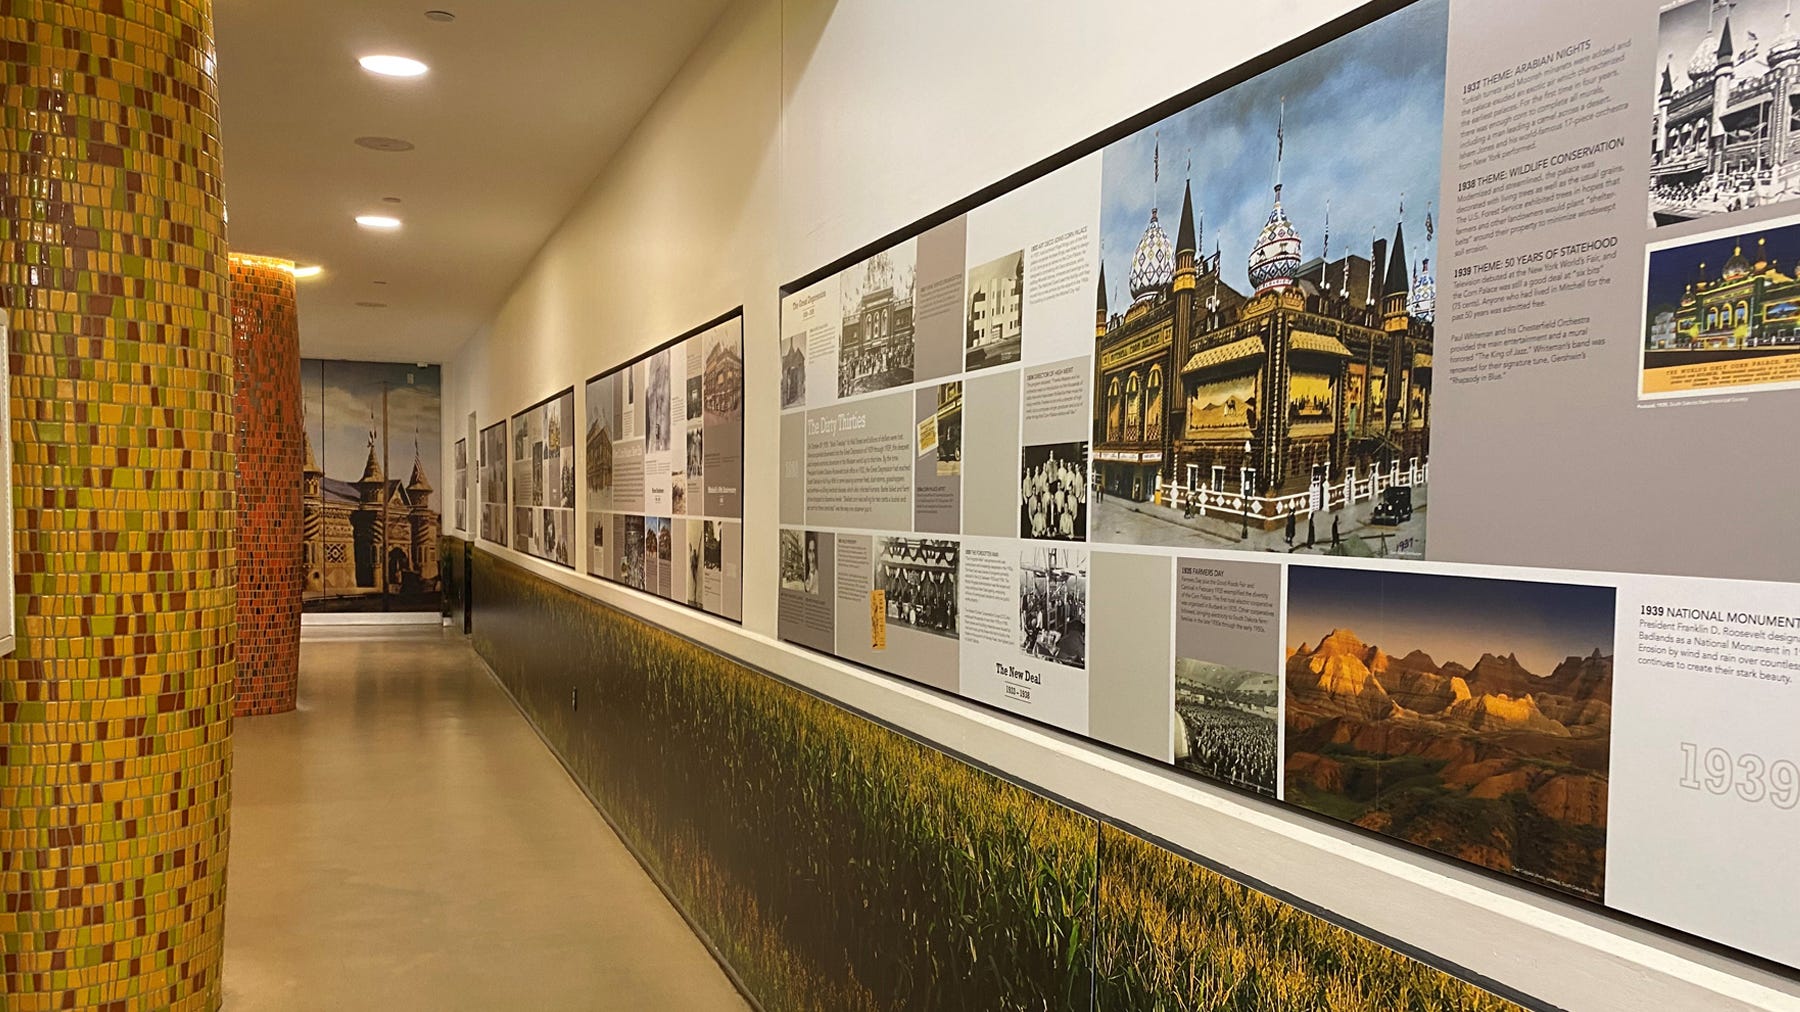 The full history of the Corn Palace on the walls